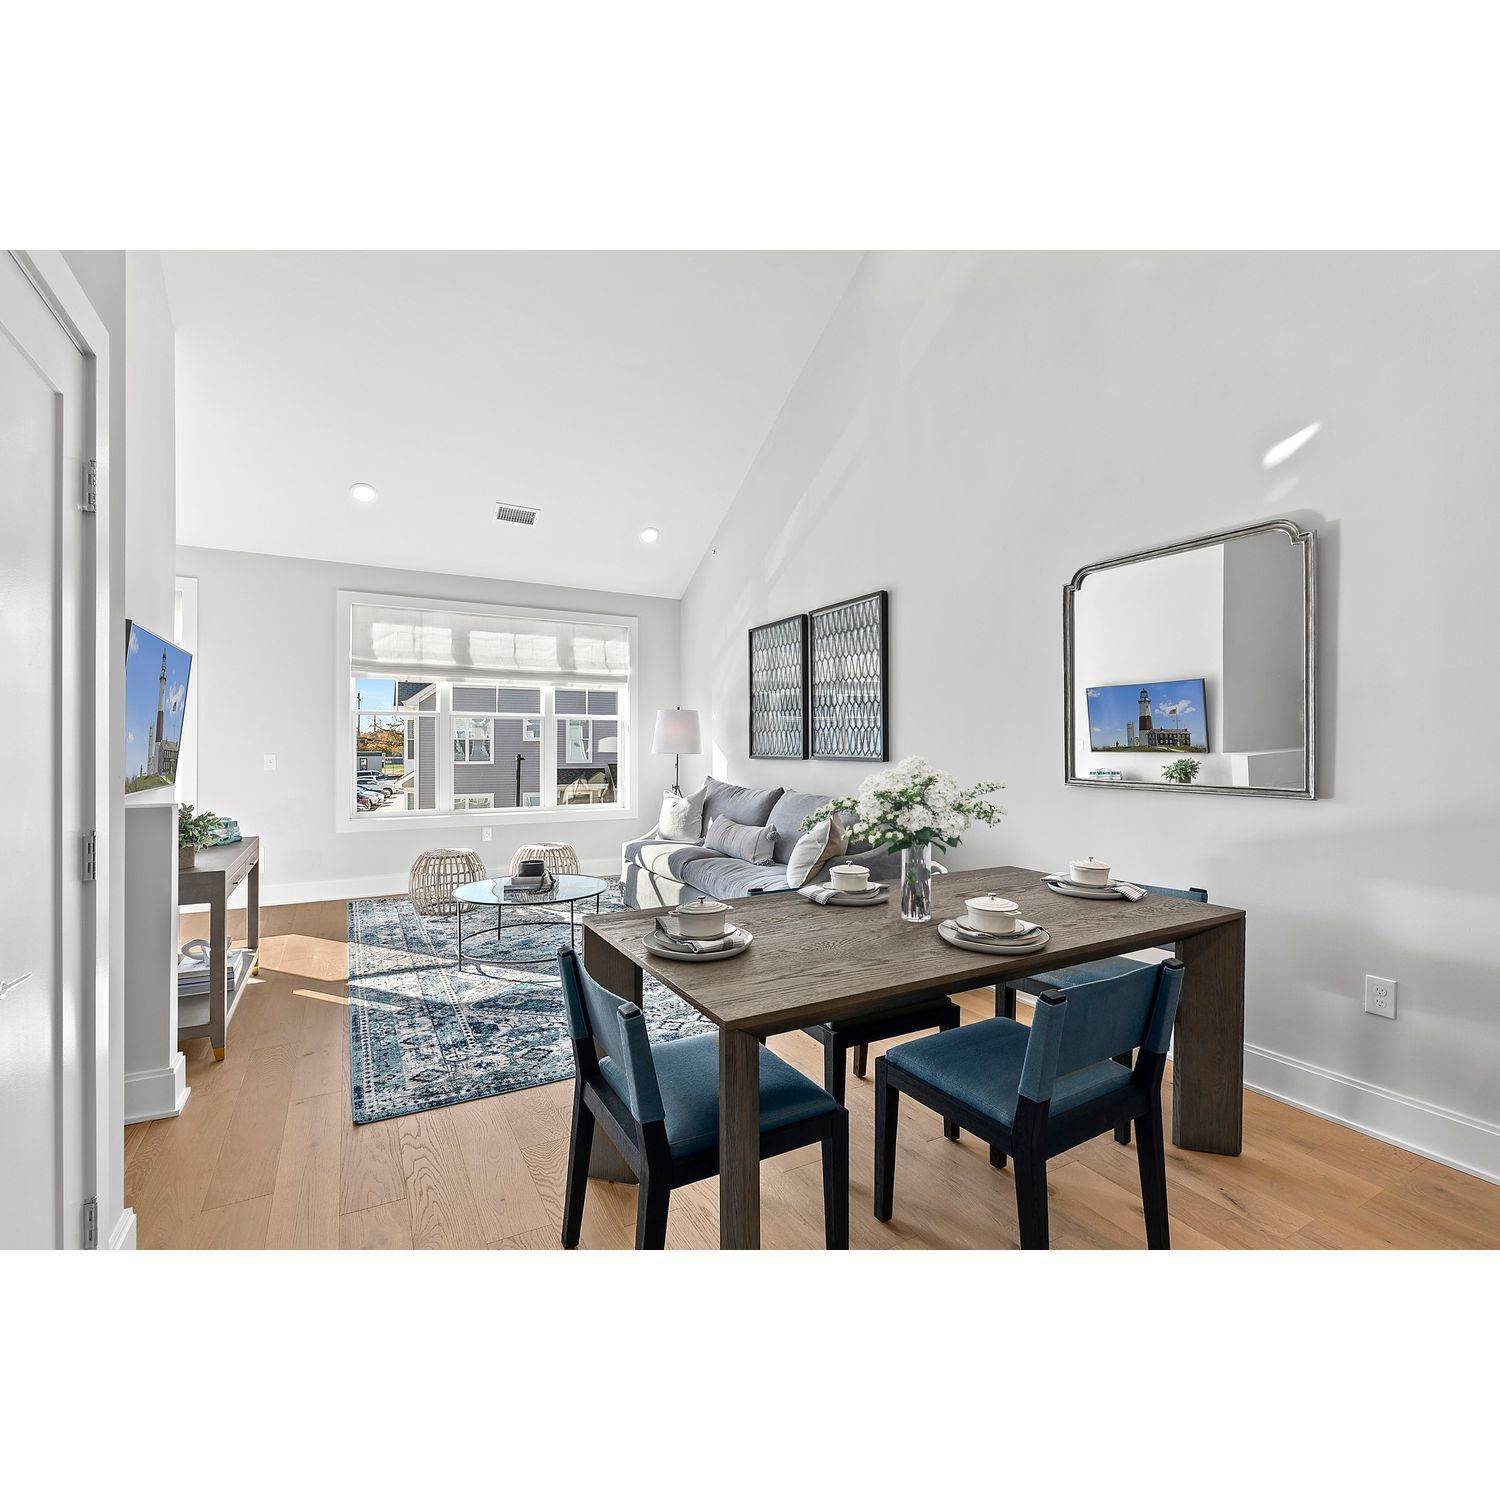 4. Meadowbrook Pointe East Meadow xây dựng tại 123 Merrick Avenue, East Meadow, NY 11554